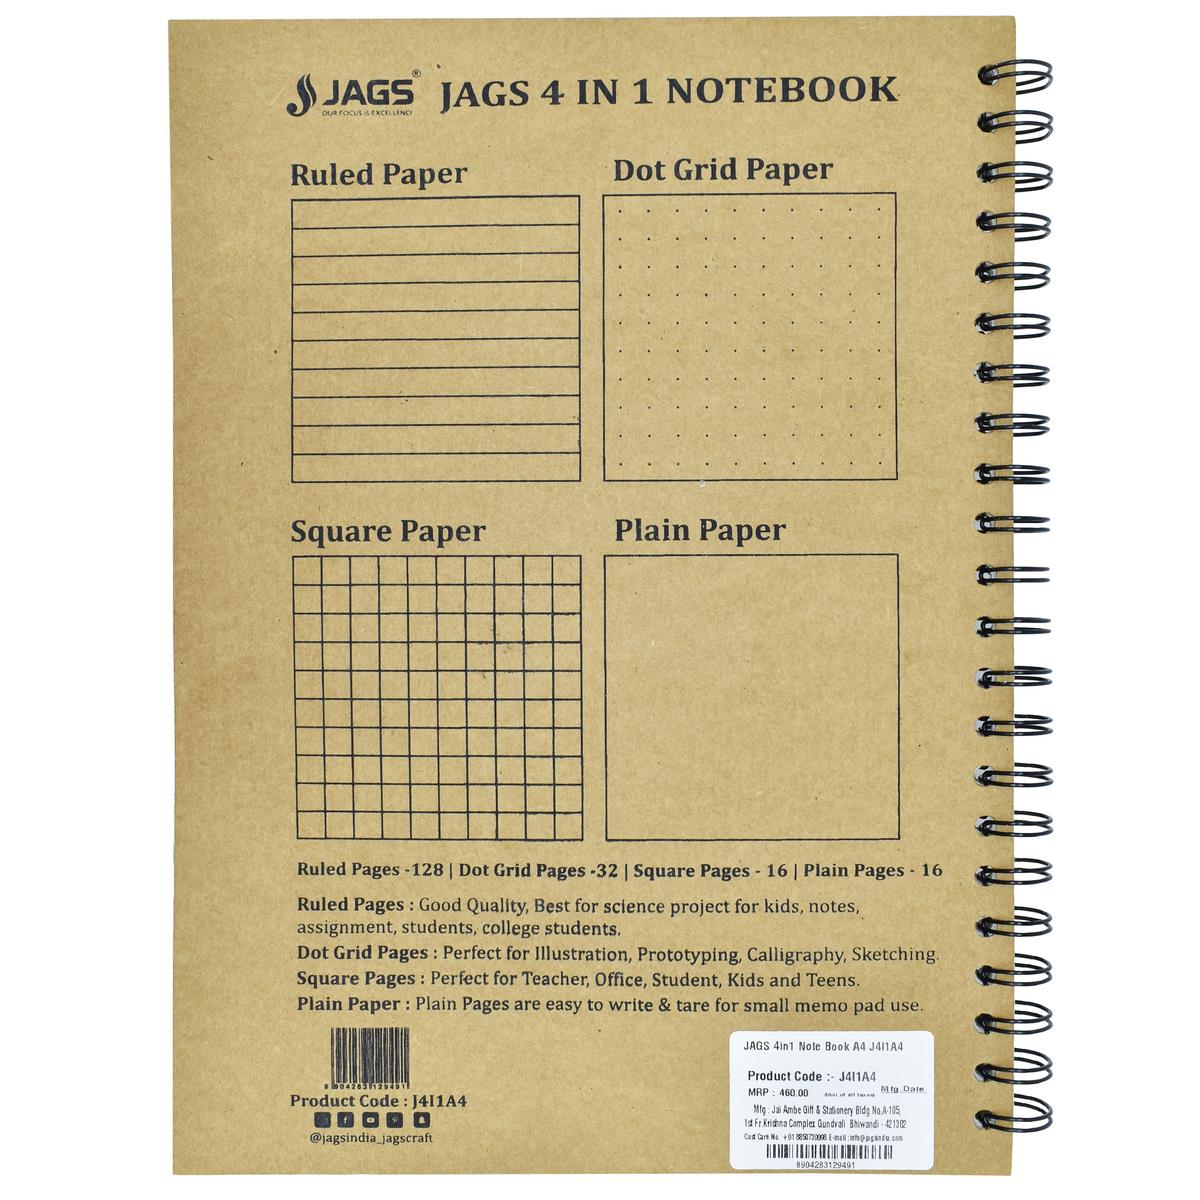 jags-mumbai Notebooks & Diaries JAGS 4in1 Note Book A4 J4I1A4